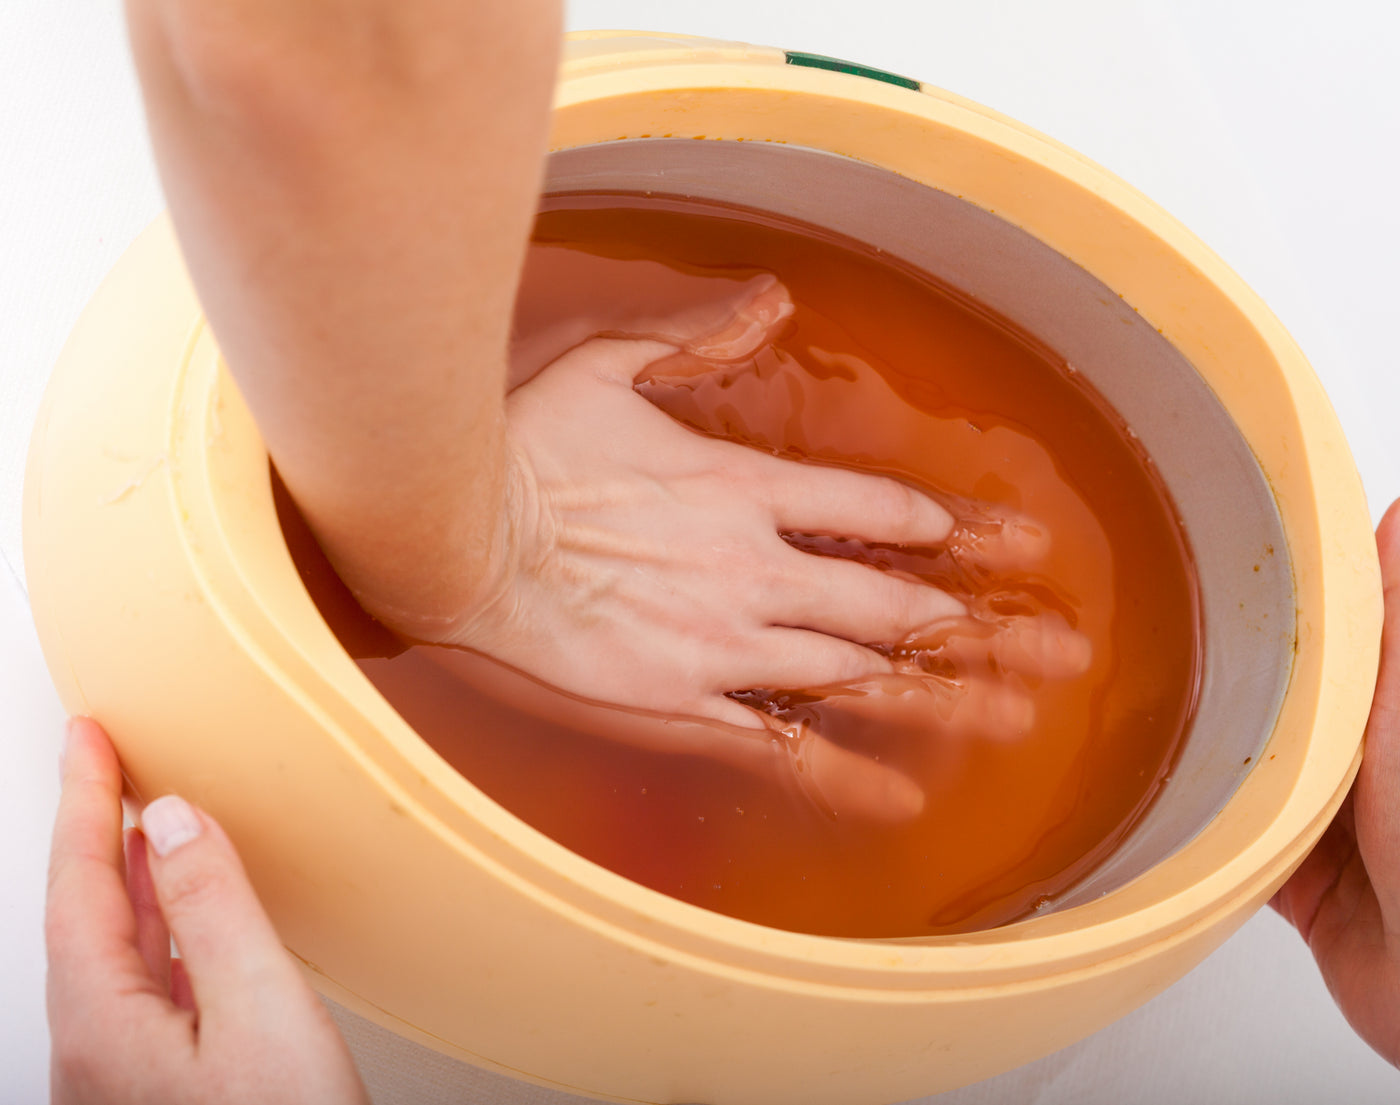 Paraffin wax: Definition, benefits, and how to use